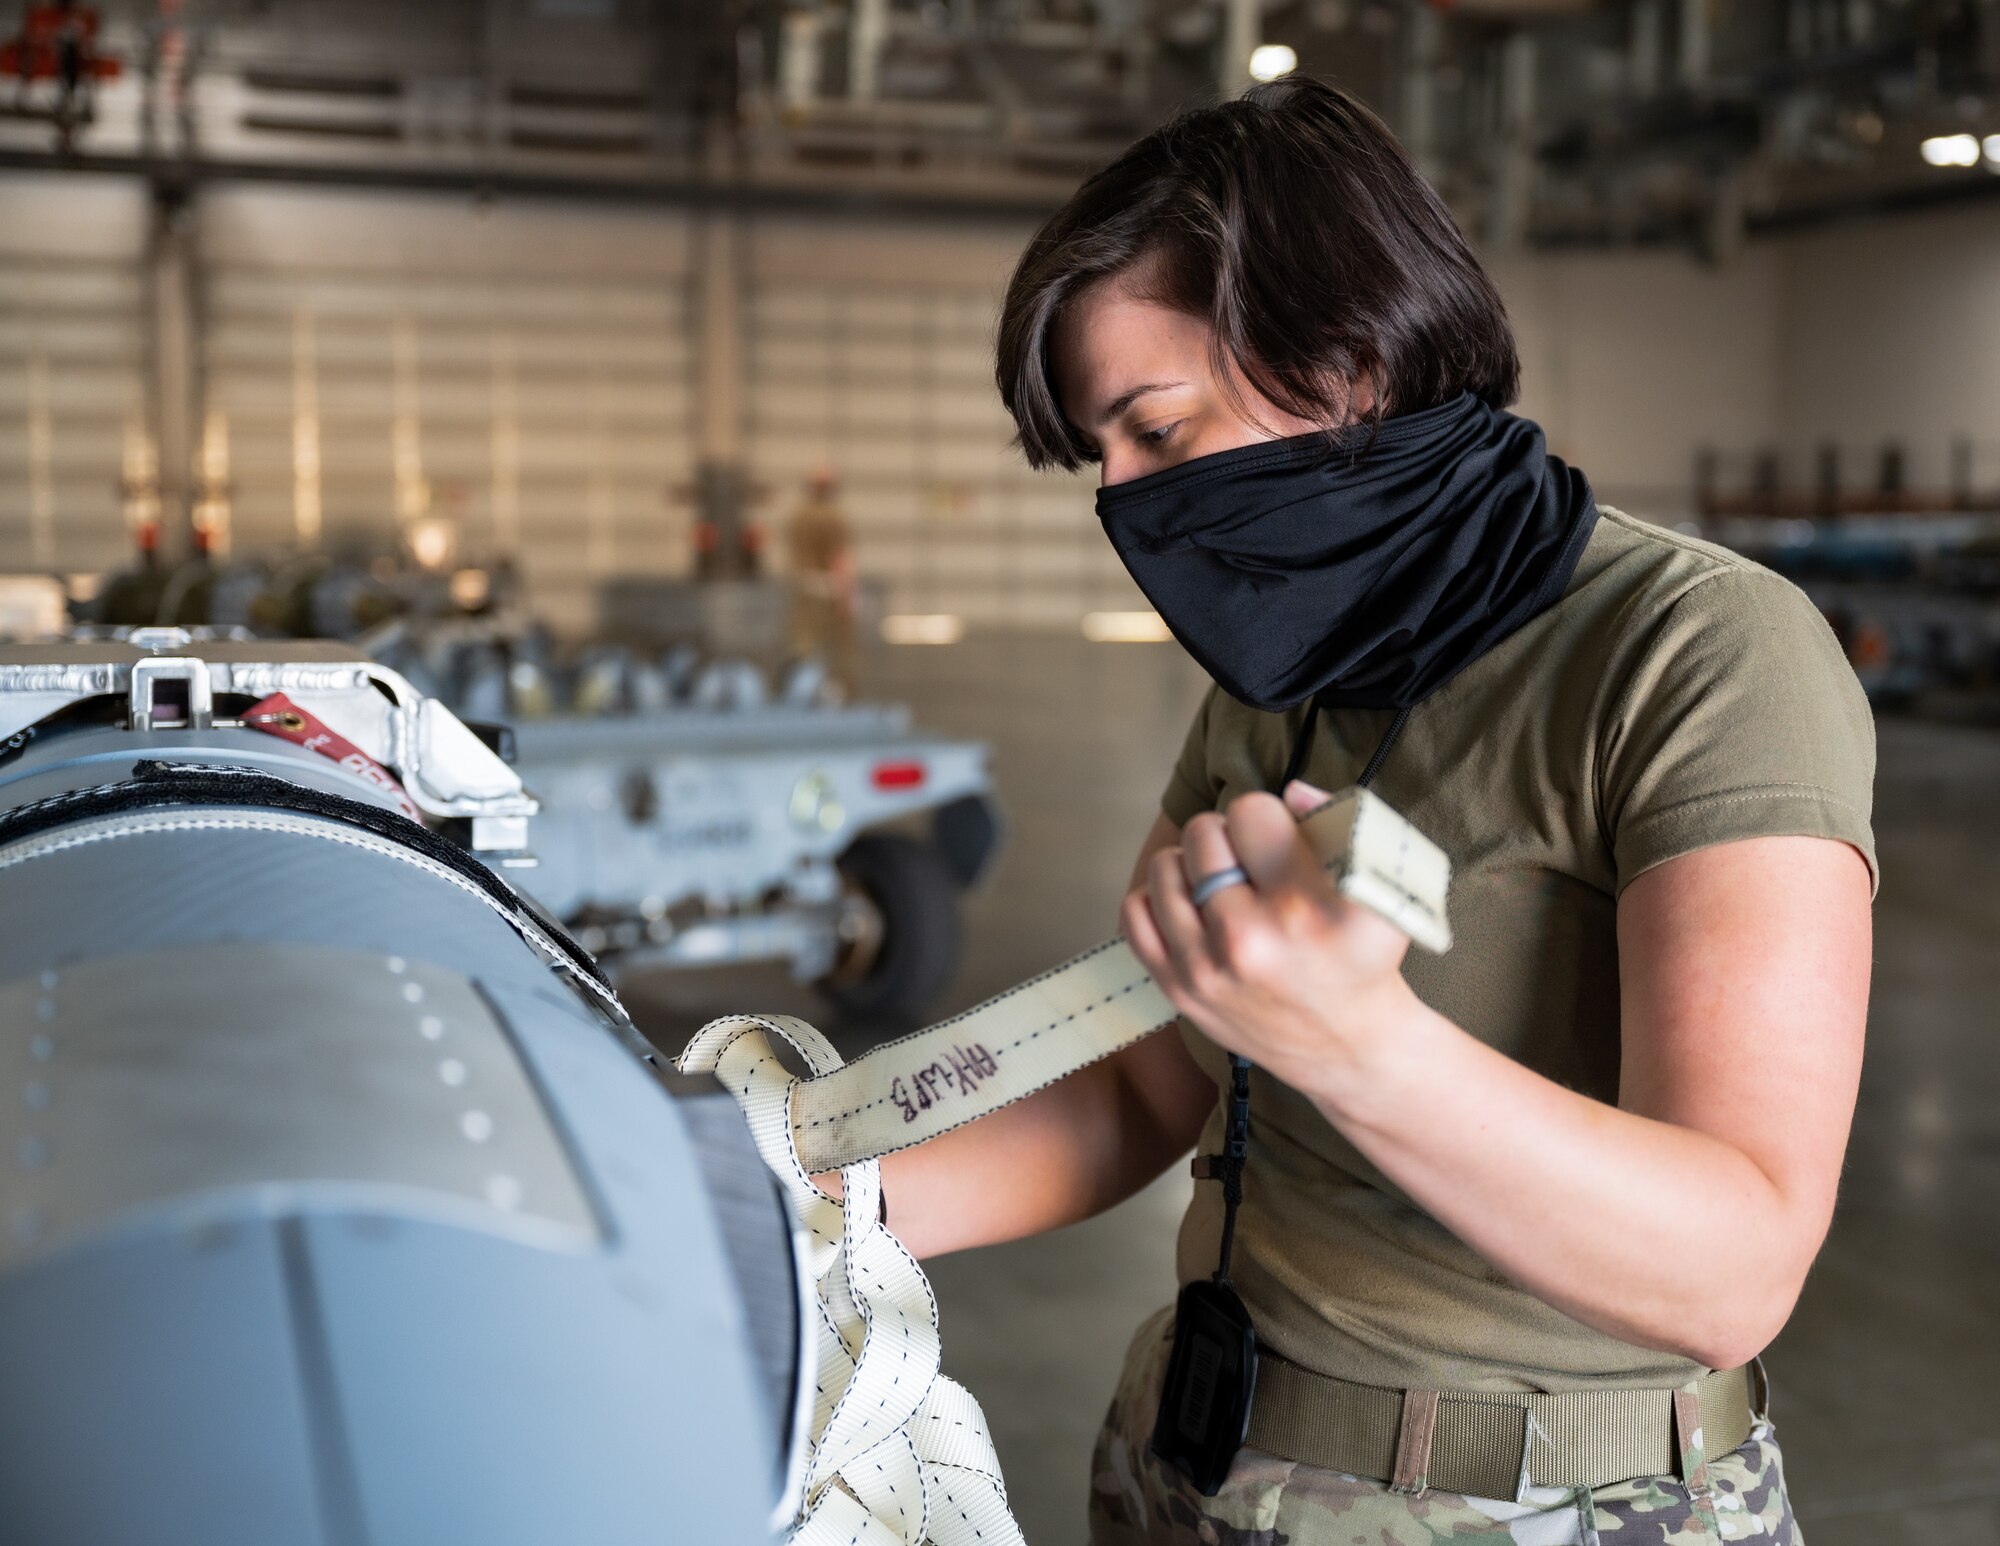 Airman 1st Class Stephanie Degennaro, 2nd Munitions Squadron conventional maintenance support technician, prepares ADM-160 Miniature Air-Launched Decoy missiles for transportation at Barksdale Air Force Base, Louisiana, Aug. 24, 2021.